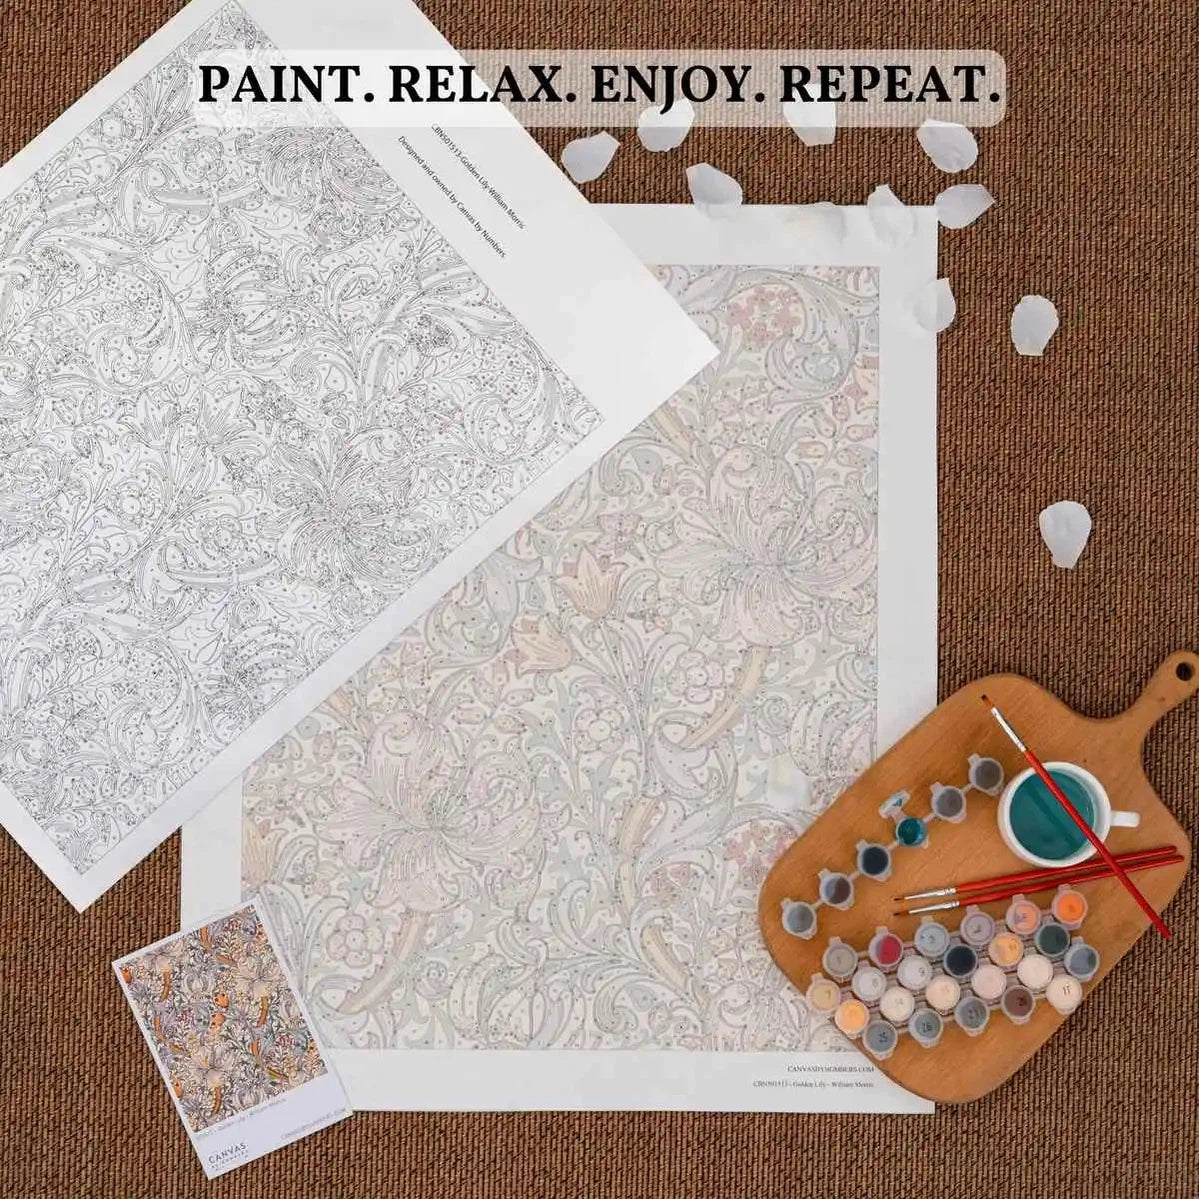 Madonnina - Paint by Numbers-You'll love our Mary and Baby Jesus paint by numbers kit. Shop more than 500 paintings at Canvas by Numbers. Up to 50% Off! Free shipping and 60 days money-back.-Canvas by Numbers